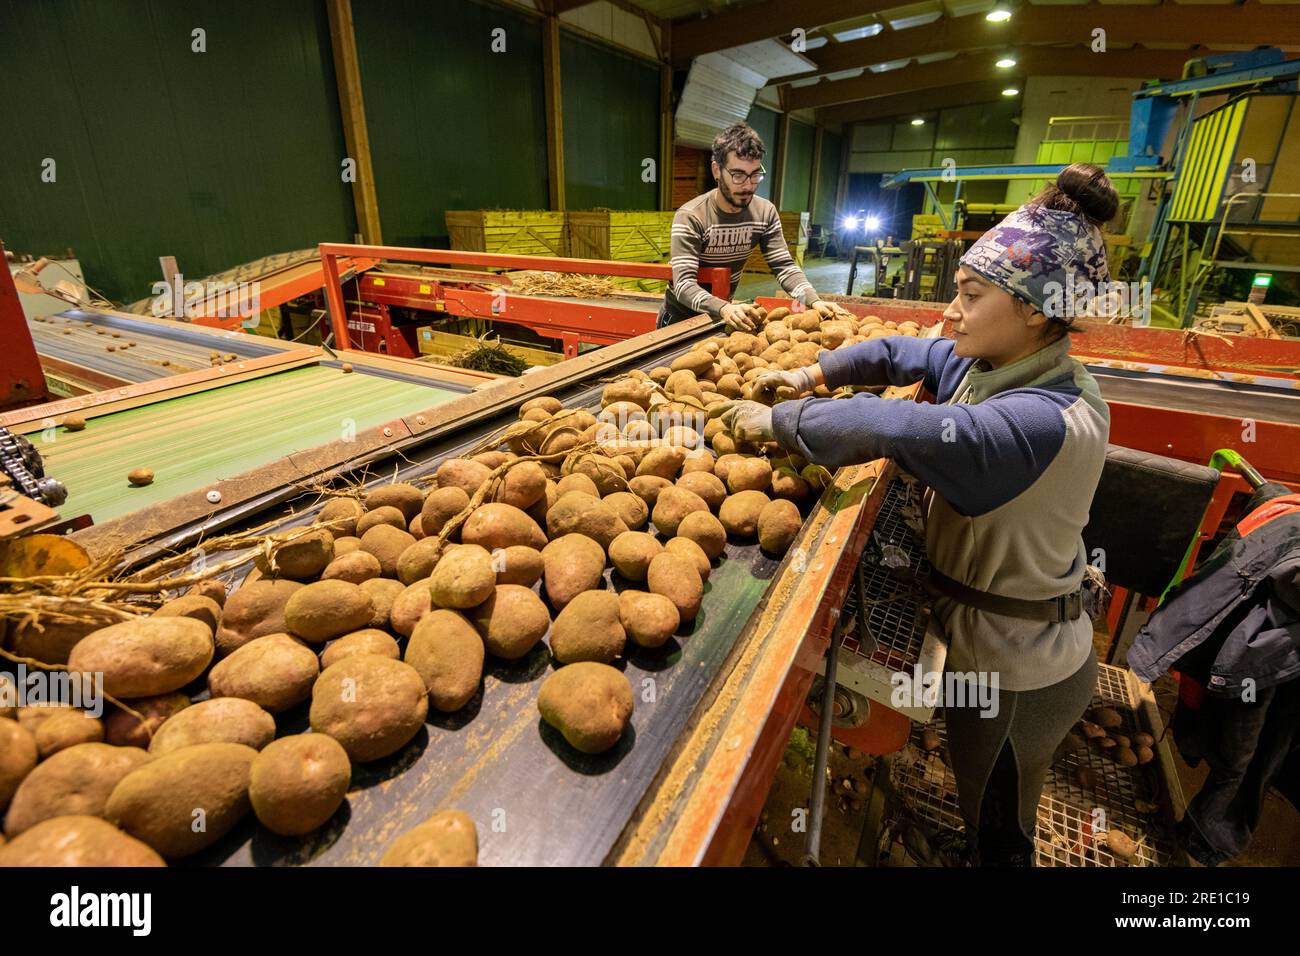 Potato harvesting: agricultural workers sorting potatoes Employees sorting Manitou potatoes, tuber with pinkish red skin. Cold storage Stock Photo